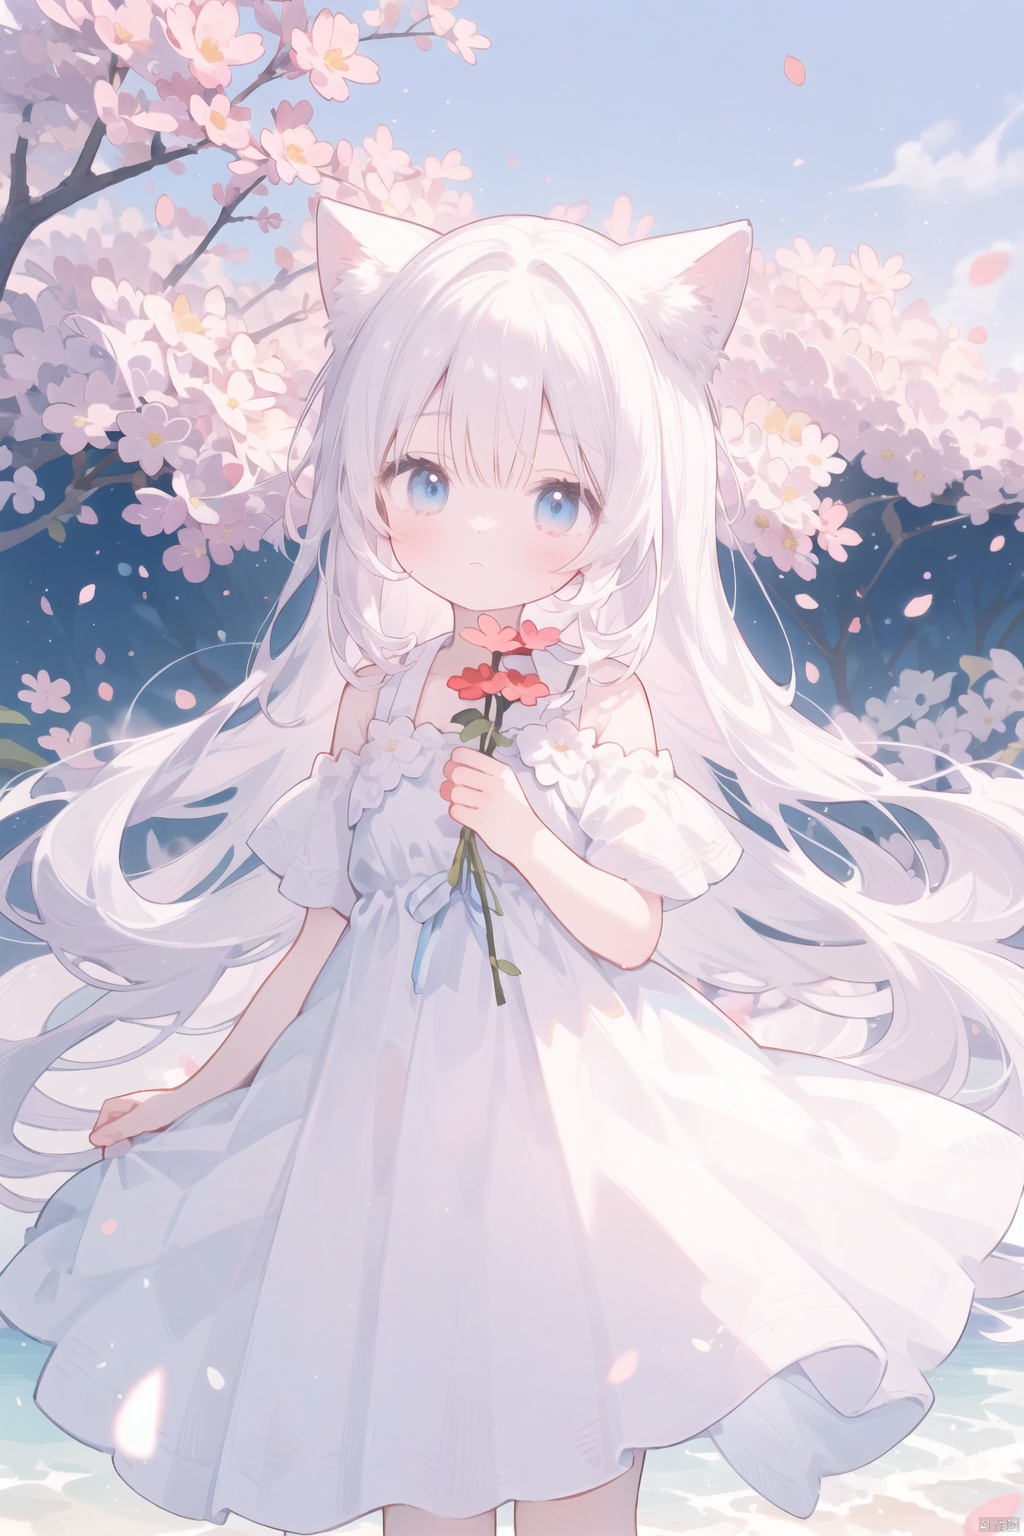  The image features a beautiful anime girl dressed in a flowing white and red dress, standing amidst a flurry of red cherry blossoms. The contrast between her white dress and the red flowers creates a striking visual effect. The lighting in the image is well-balanced, casting a warm glow on the girl and the surrounding flowers. The colors are vibrant and vivid, with the red cherry blossoms standing out against the white sky. The overall style of the image is dreamy and romantic, perfect for a piece of anime artwork. The quality of the image is excellent, with clear details and sharp focus. The girl's dress and the flowers are well-defined, and the background is evenly lit, without any harsh shadows or glare. From a technical standpoint, the image is well-composed, with the girl standing in the center of the frame, surrounded by the blossoms. The use of negative space in the background helps to draw the viewer's attention to the girl and the flowers. The cherry blossoms, often associated with transience and beauty, further reinforce this theme. The girl, lost in her thoughts, seems to be contemplating the fleeting nature of beauty and the passage of time. Overall, this is an impressive image that showcases the photographer's skill in capturing the essence of a scene, as well as their ability to create a compelling narrative through their art.catgirl,loli,catgirl,white hair,blue eyes,
